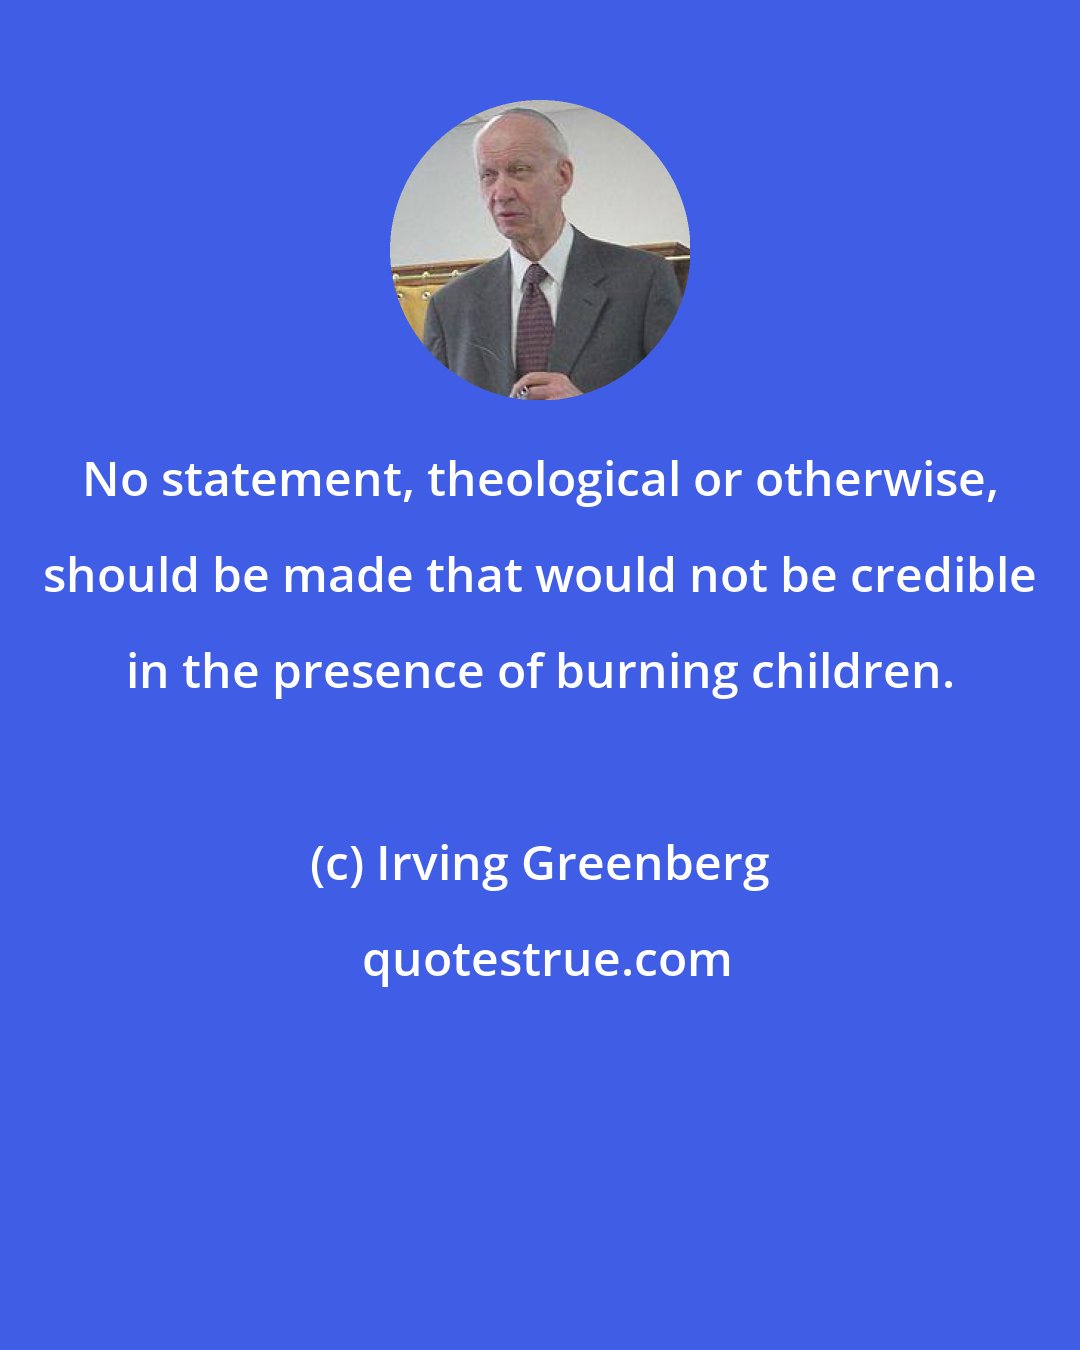 Irving Greenberg: No statement, theological or otherwise, should be made that would not be credible in the presence of burning children.